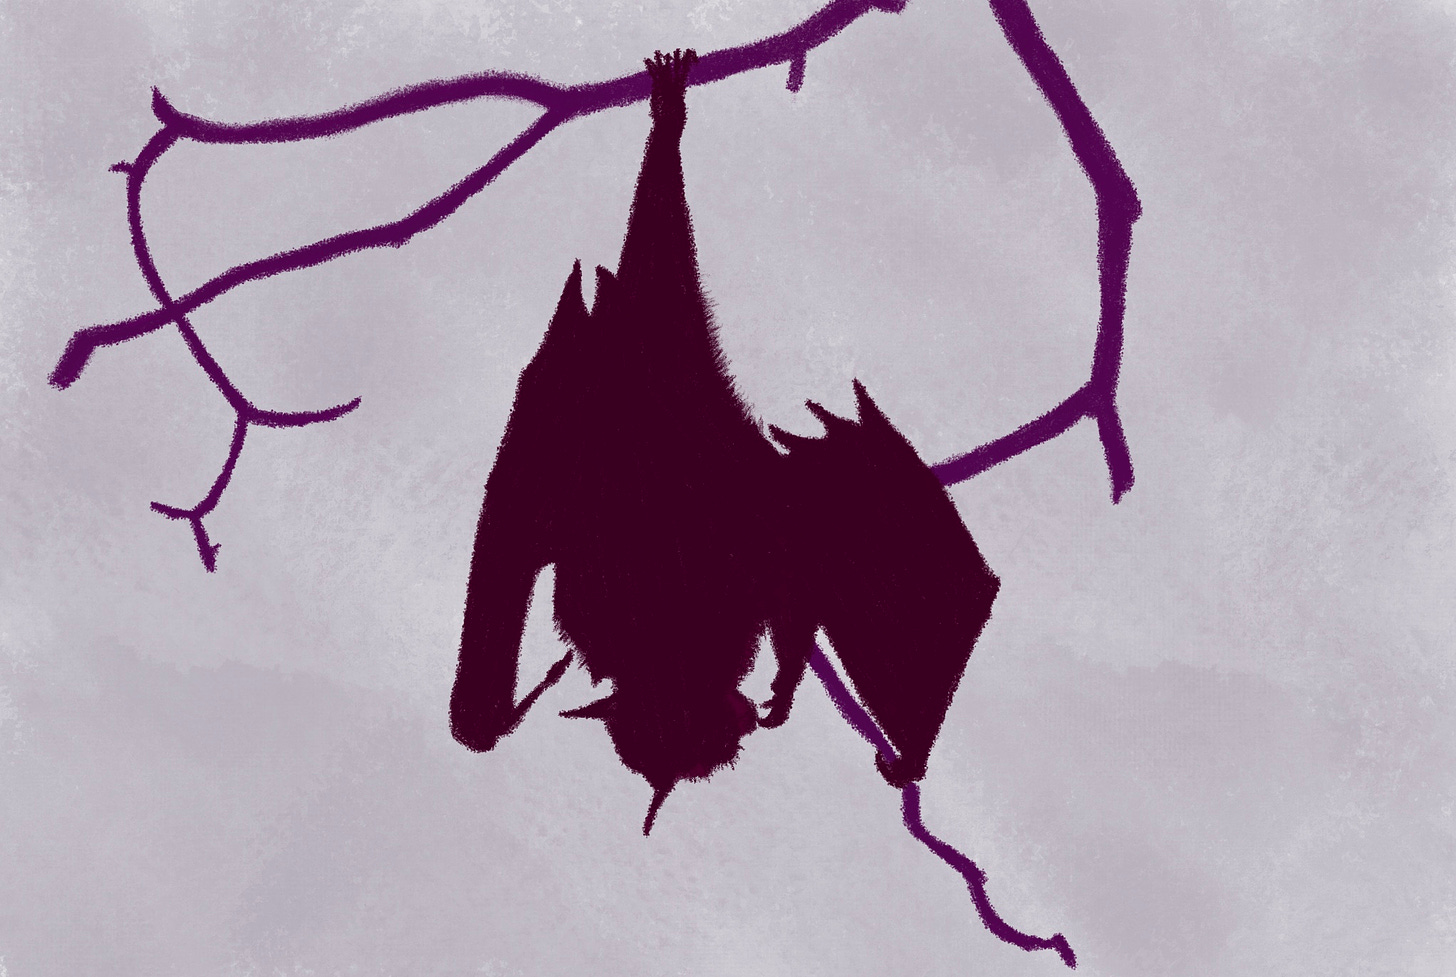 Pencil drawing of a burgundy bat hanging by one foot from a purple tree.